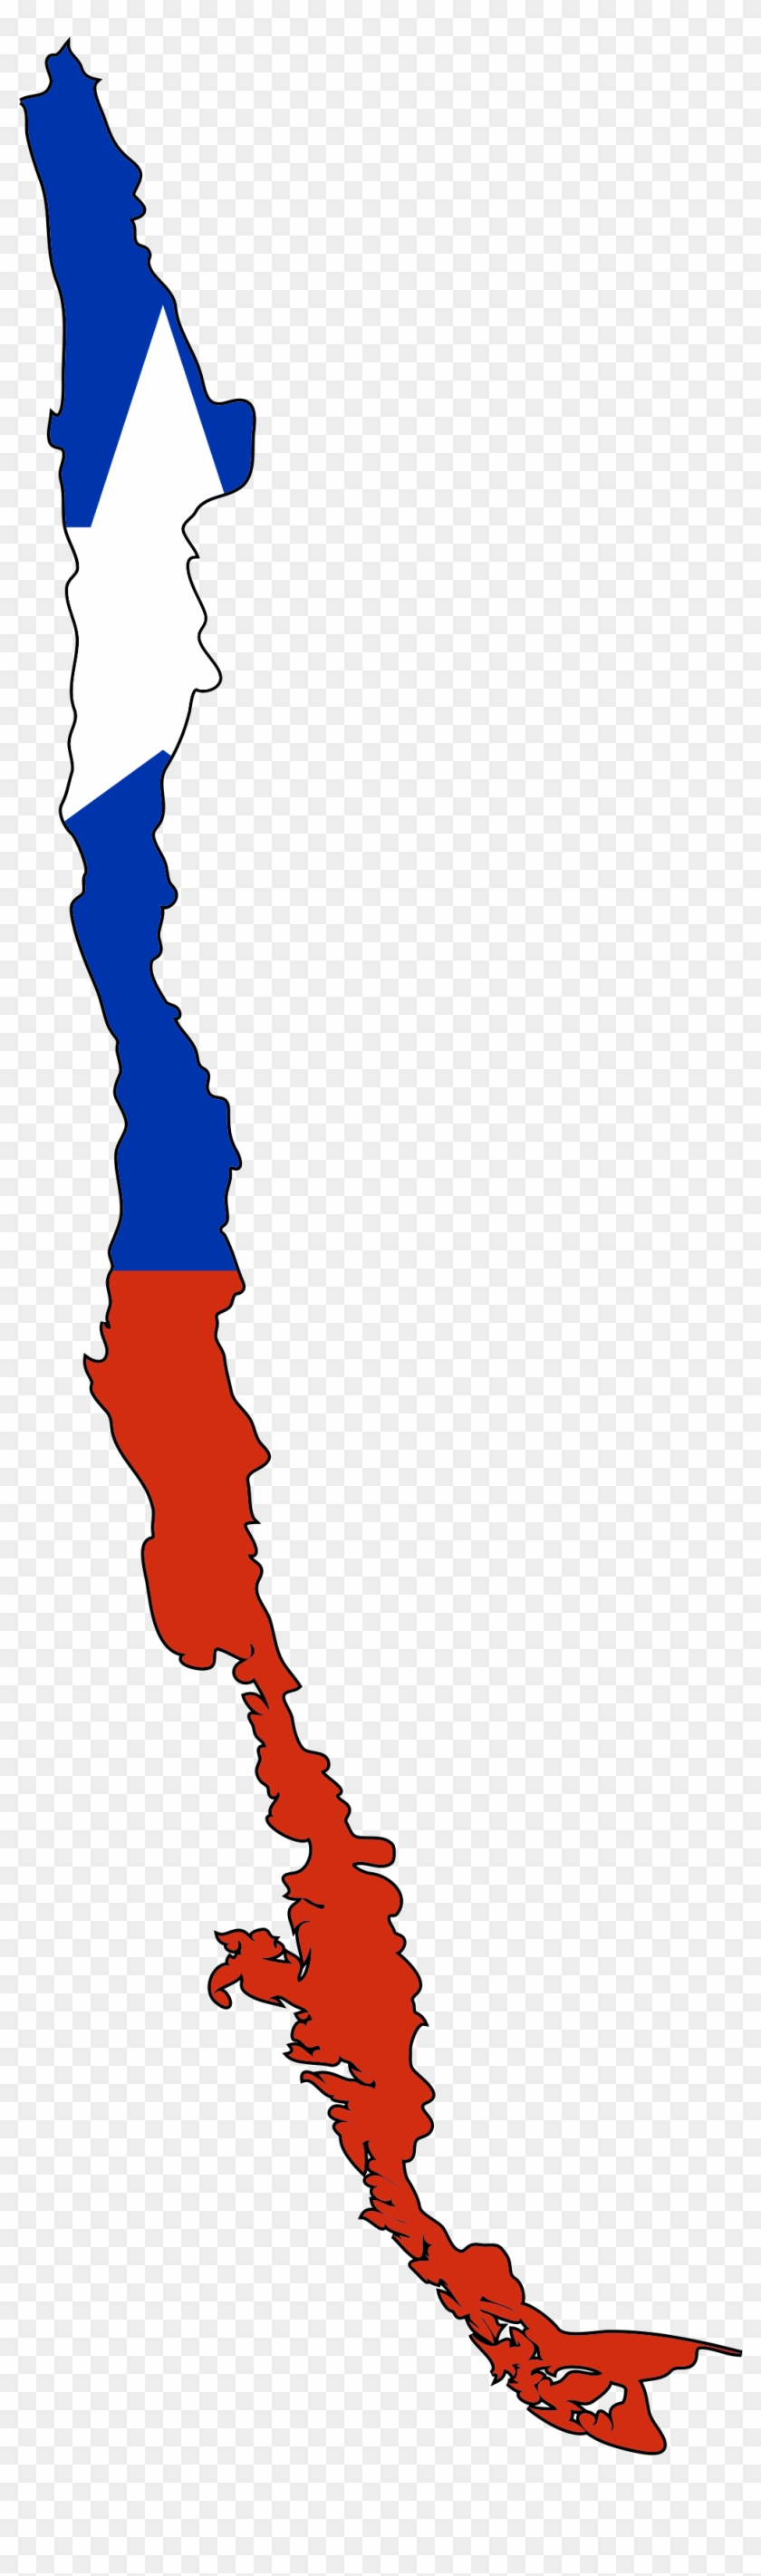 Chile Flag Map - Chile Flag Map Png Clipart #1421832